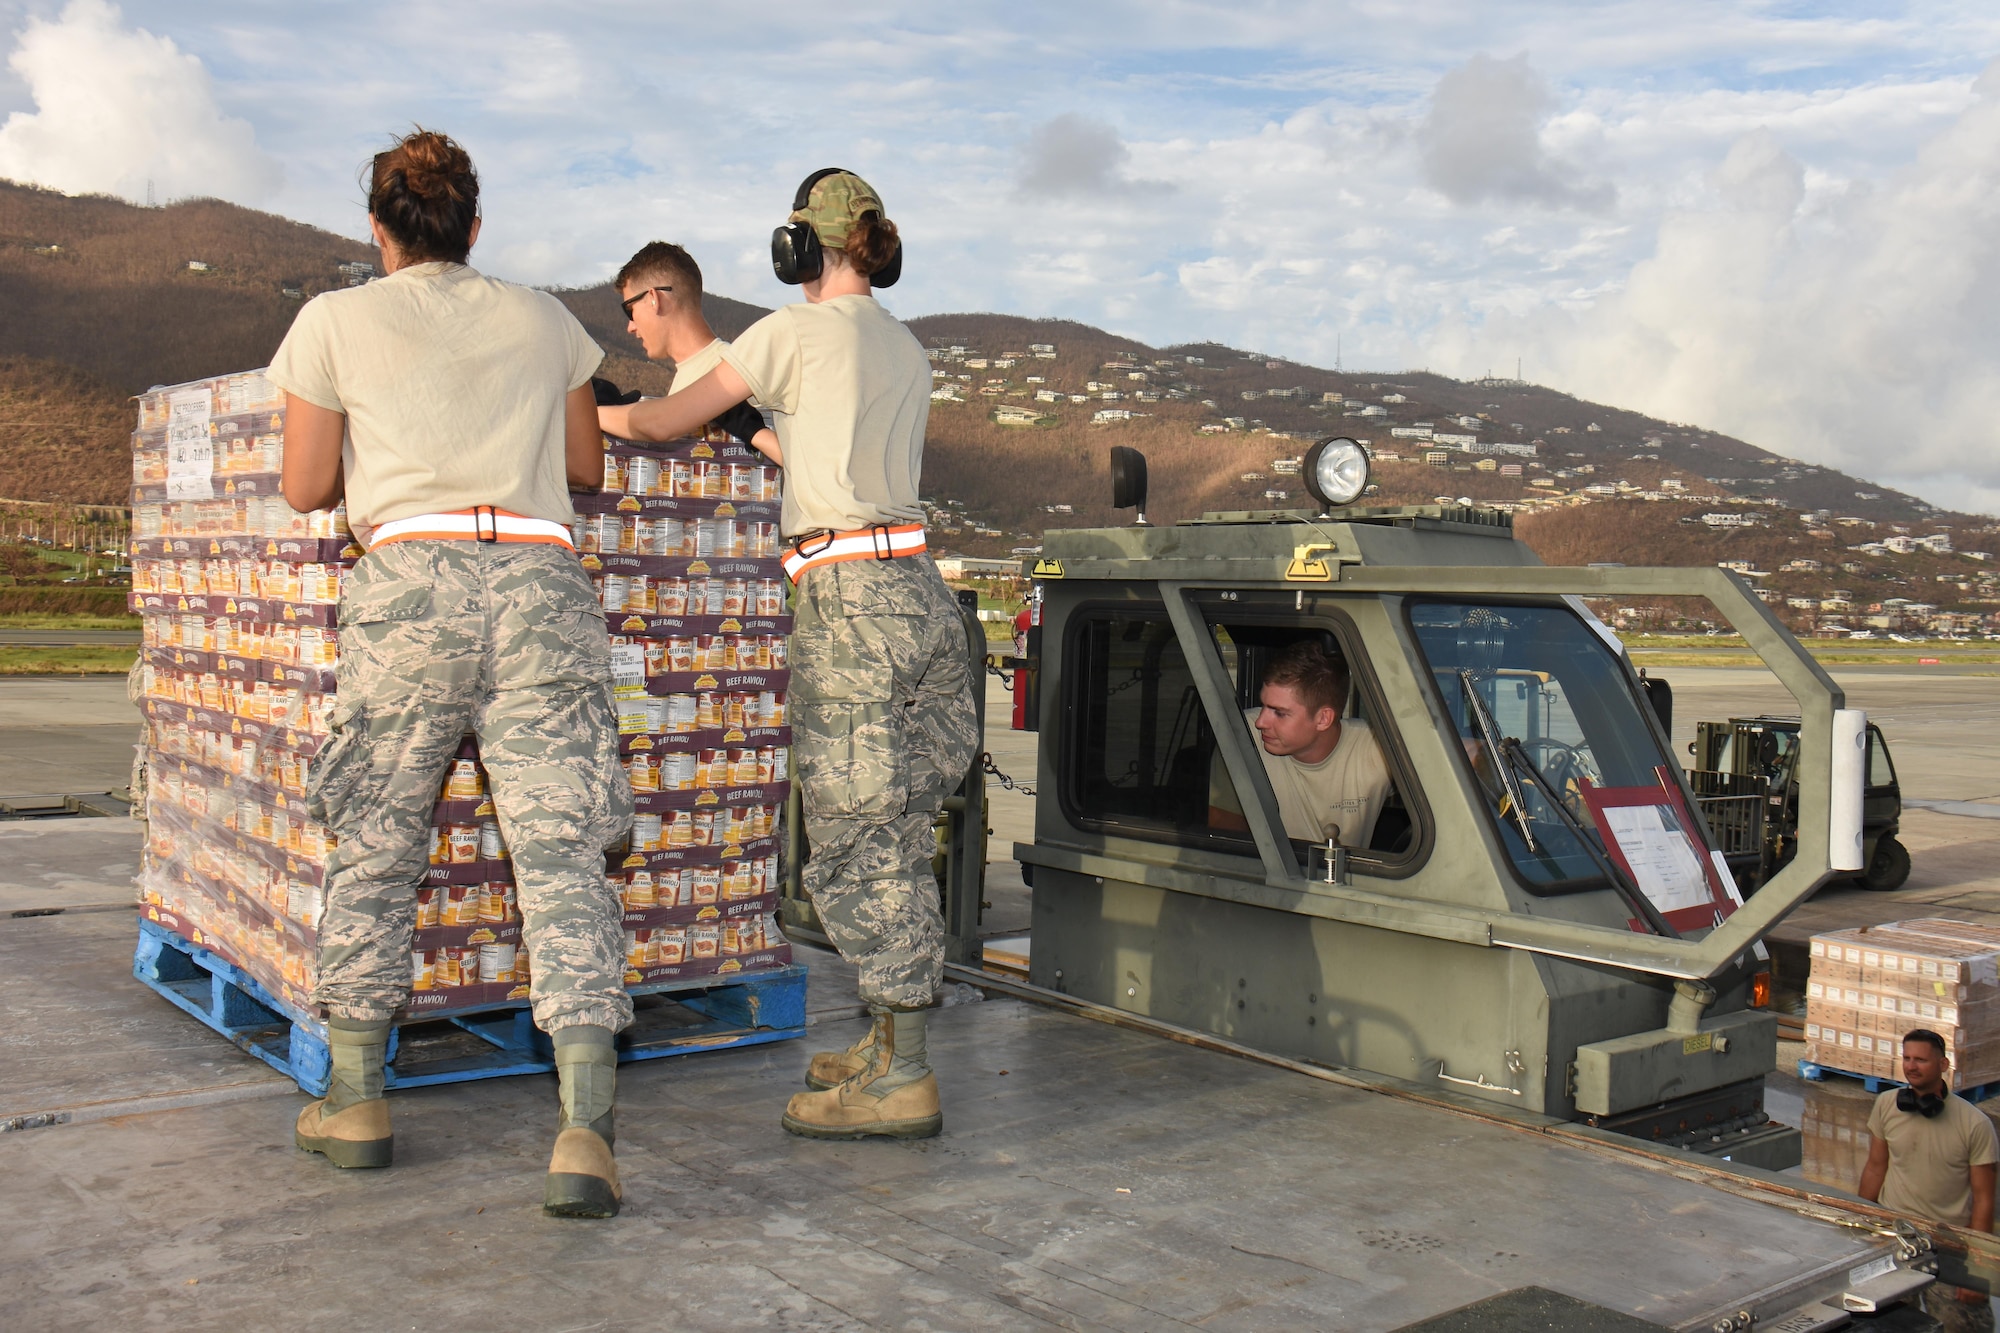 Air transportation specialists with the Air National Guard's 133rd Airlift Wing in Minneapolis, Minnesota utilize a Halvorsen loader to offload pallets of food and supplies at Cyril E. King Airport in St. Thomas, U.S. Virgin Islands, Sept. 15, 2017. 133rd AW personnel joined Airmen assigned to the 161st Air Refueling Wing in Phoenix, Arizona, and 146th Airlift Wing in Camarillo, California to manage air operations at the storm damaged airport in St. Thomas in the wake of Hurricane Irma. (U.S. Air National Guard photo by Master Sgt. Paul Gorman)